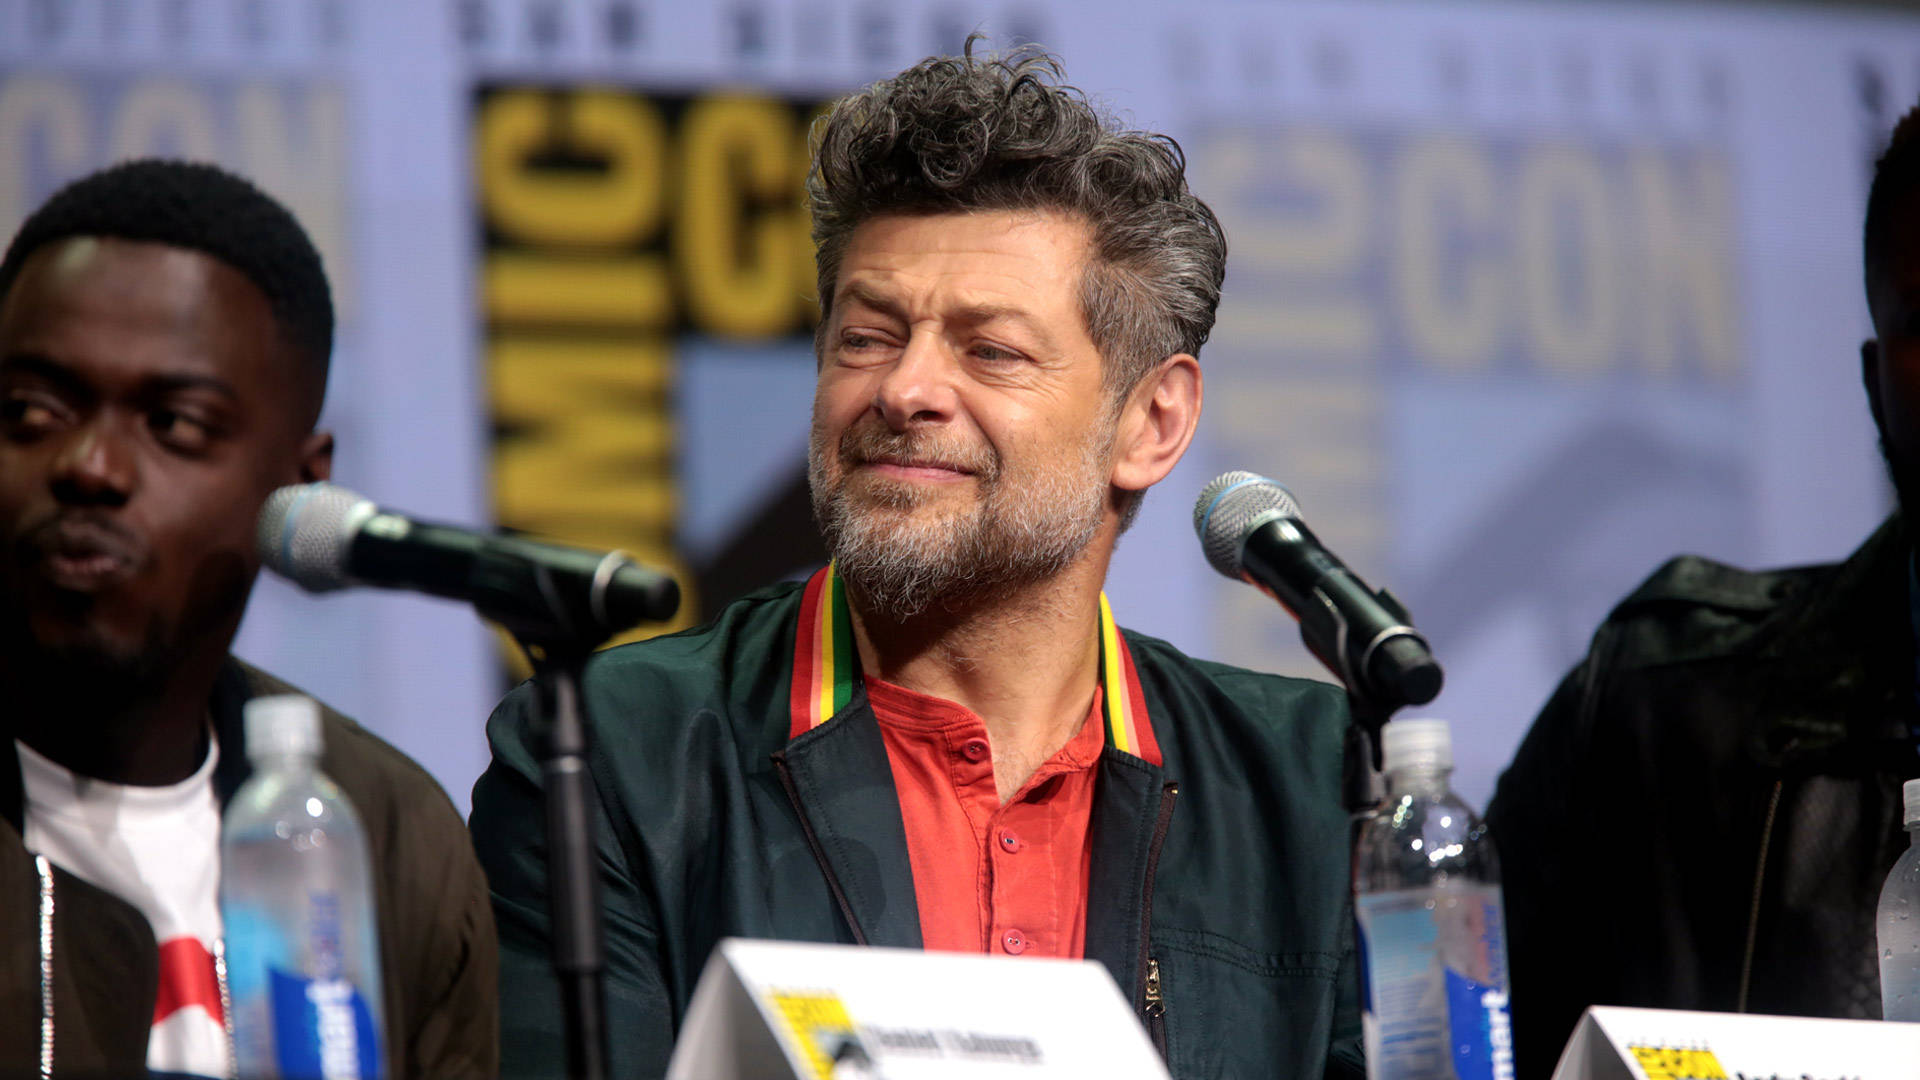 Andy Serkis In Comic Con Wallpaper